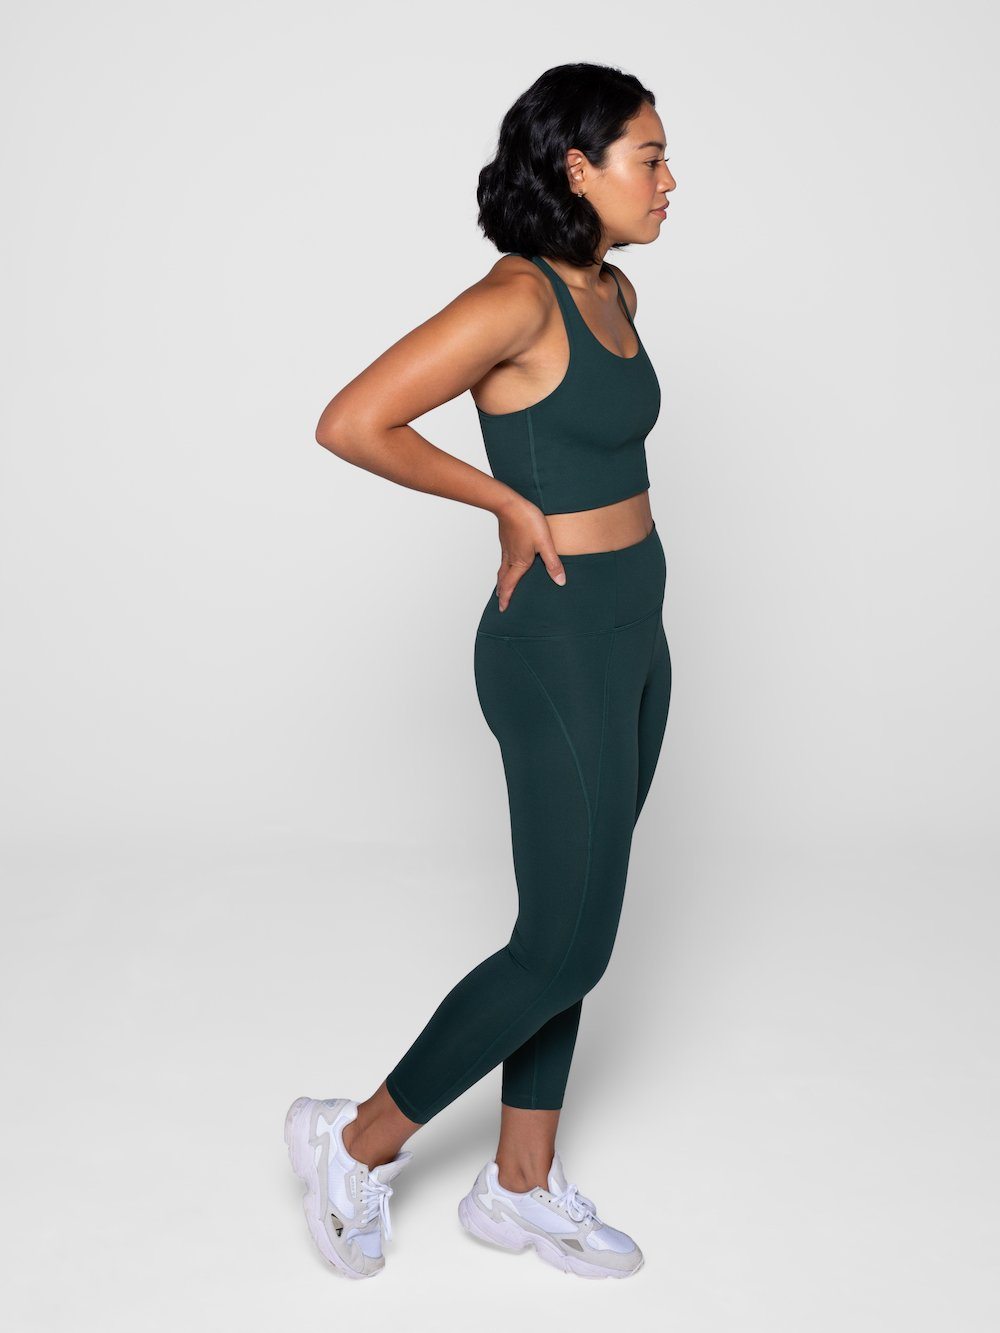 Girlfriend Collective W's Compressive Legging - 7/8 - Made From Recycled Plastic Bottles Moss Pants